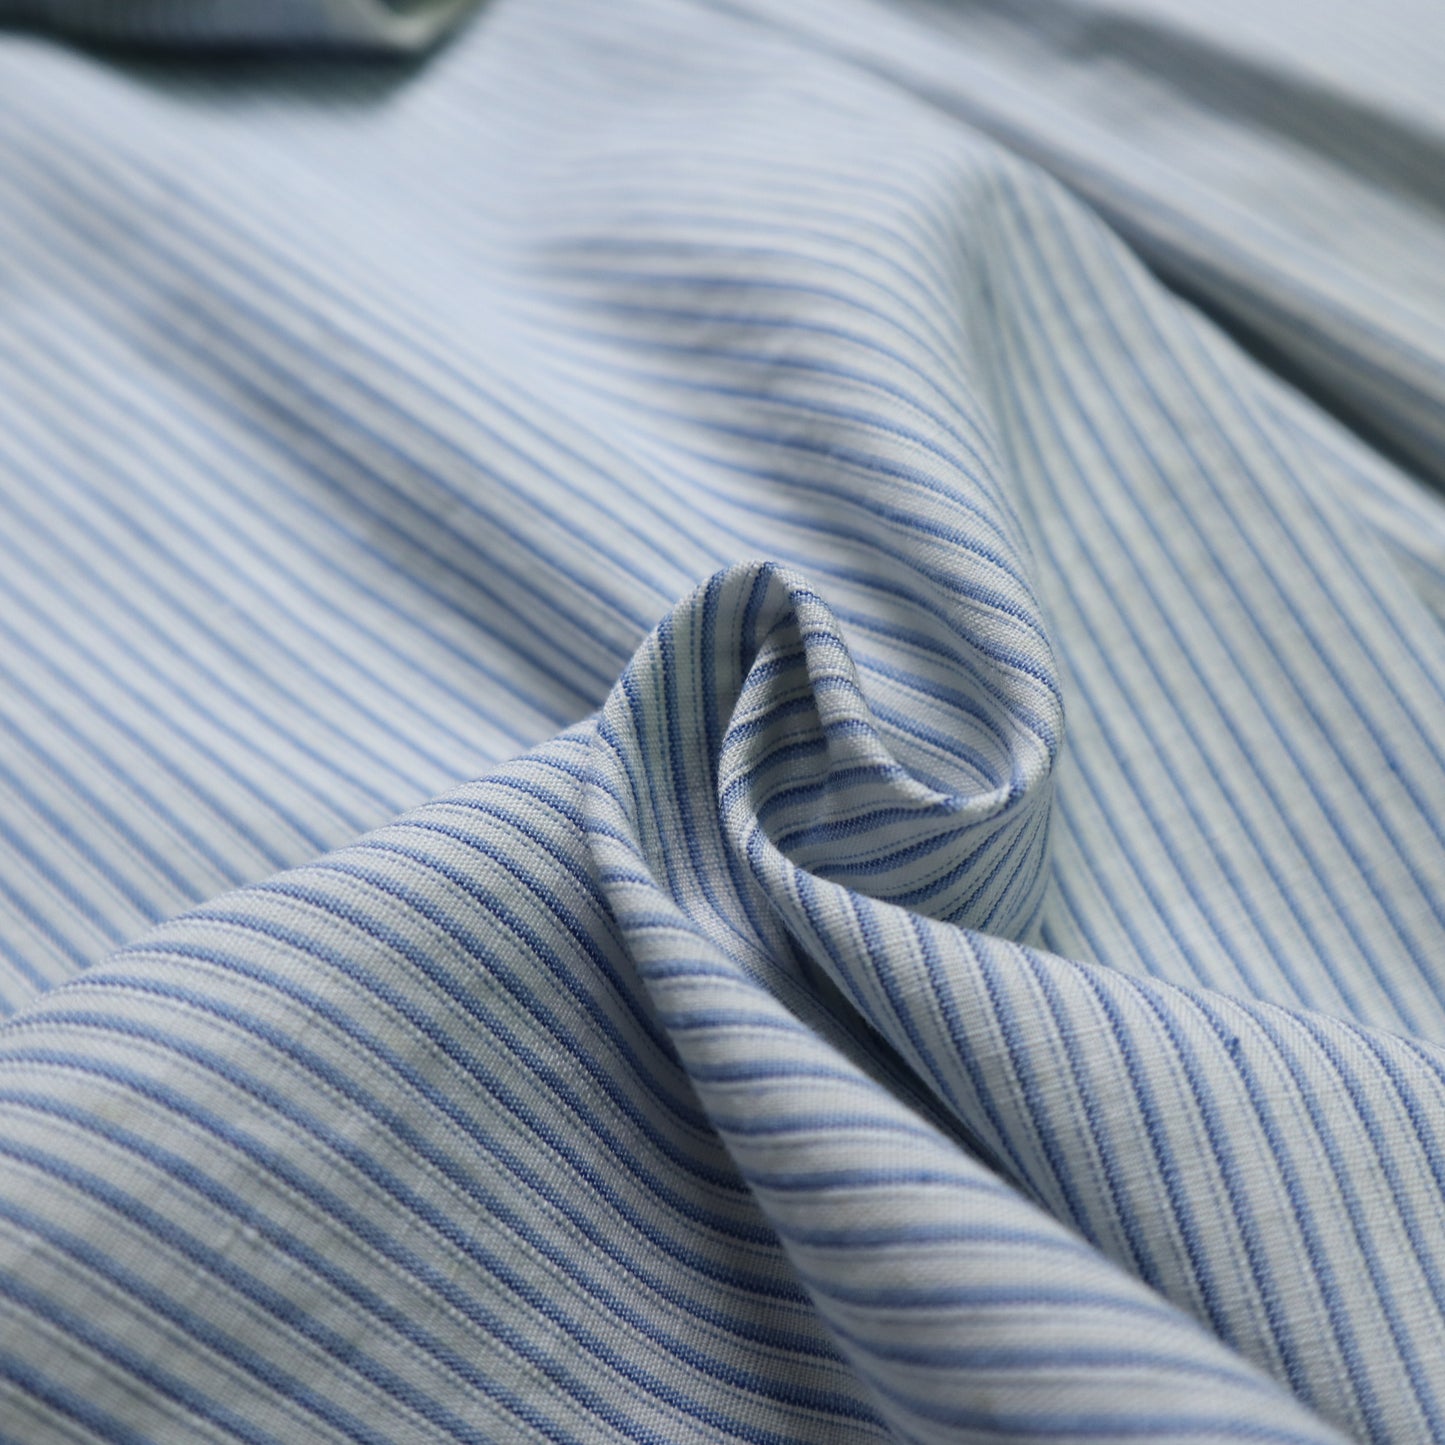 1940s French blue and white striped work shirt